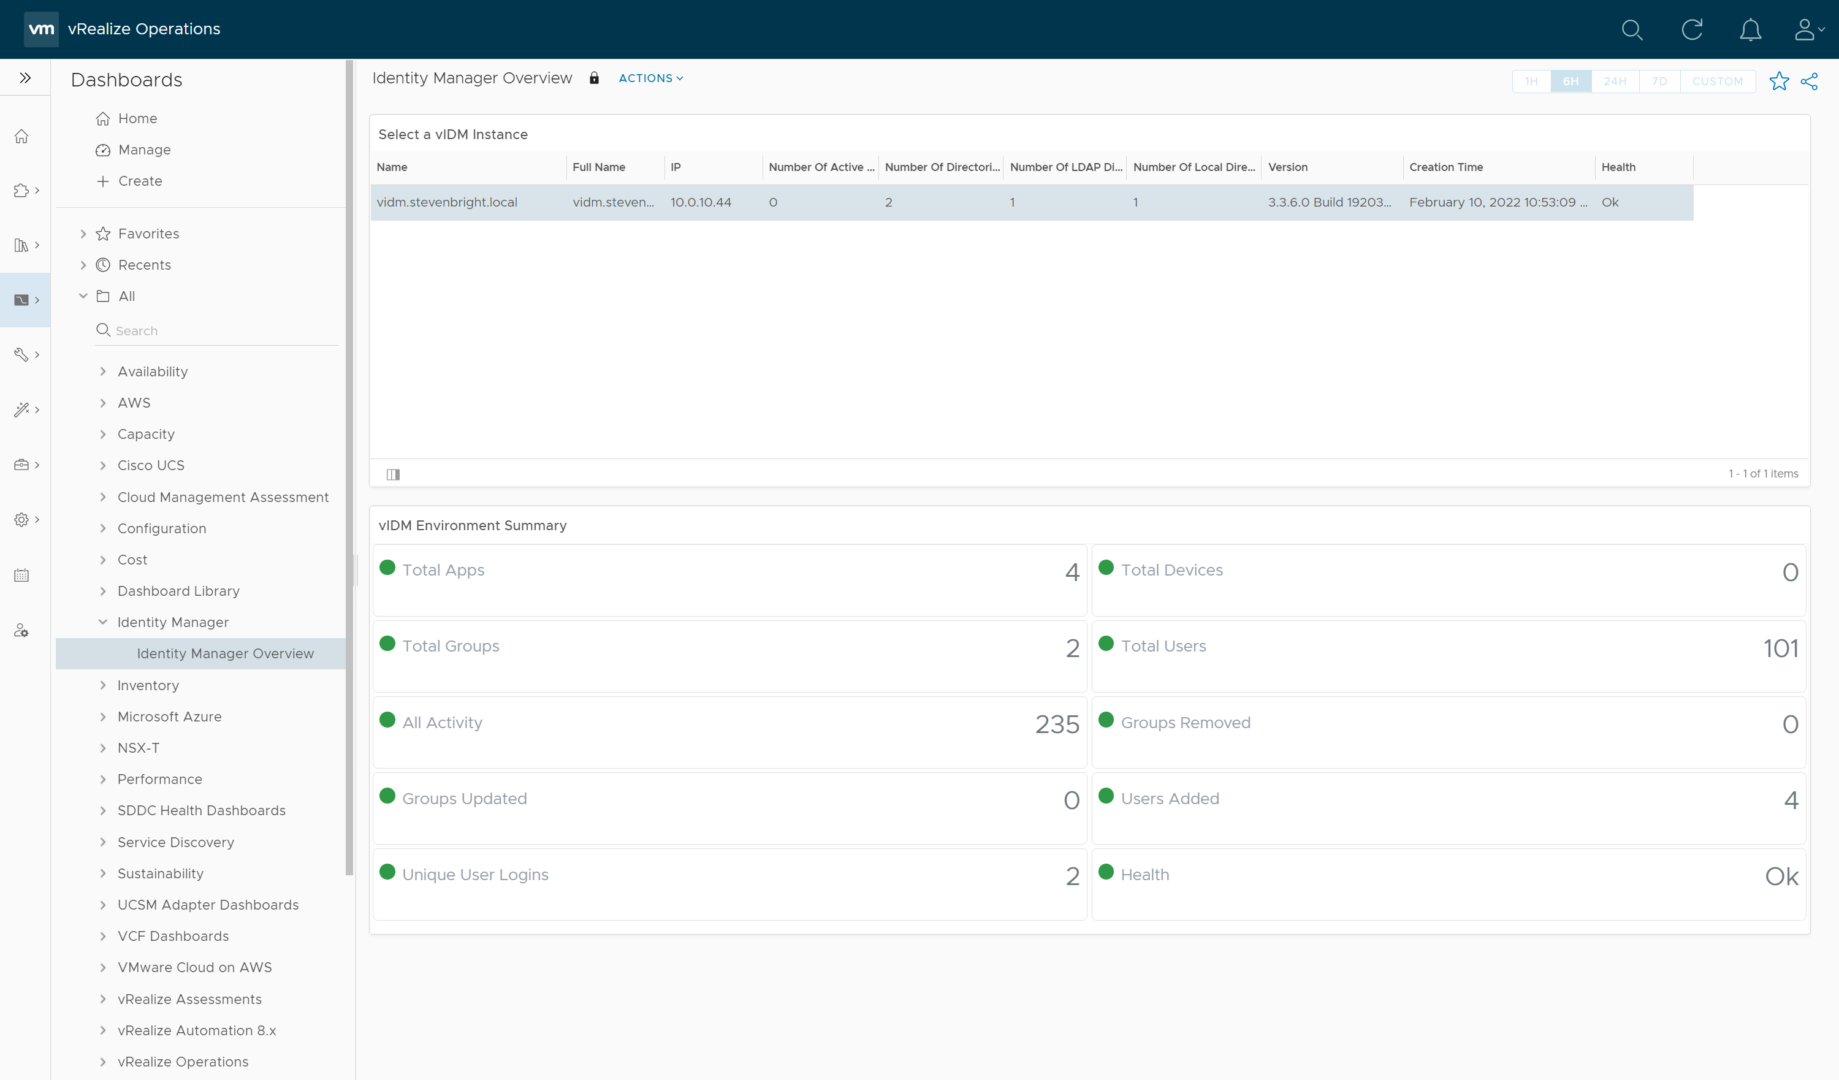 VMware Identity Manager Overview Dashboard